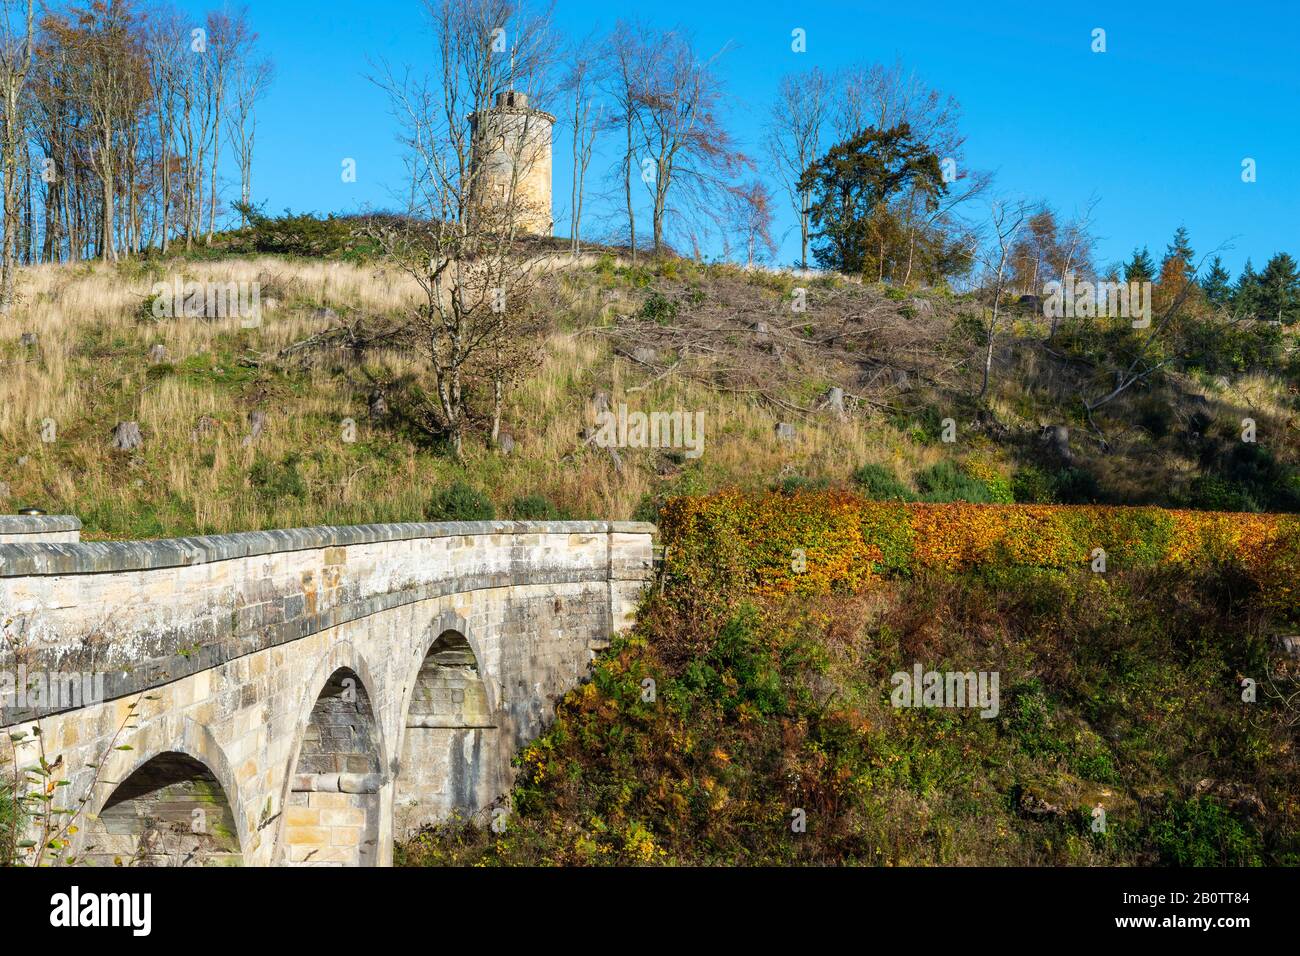 Stone arch bridge on main entrance driveway with Knight’s Law Tower in background, Penicuik Estate, Midlothian, Scotland, United Kingdom Stock Photo